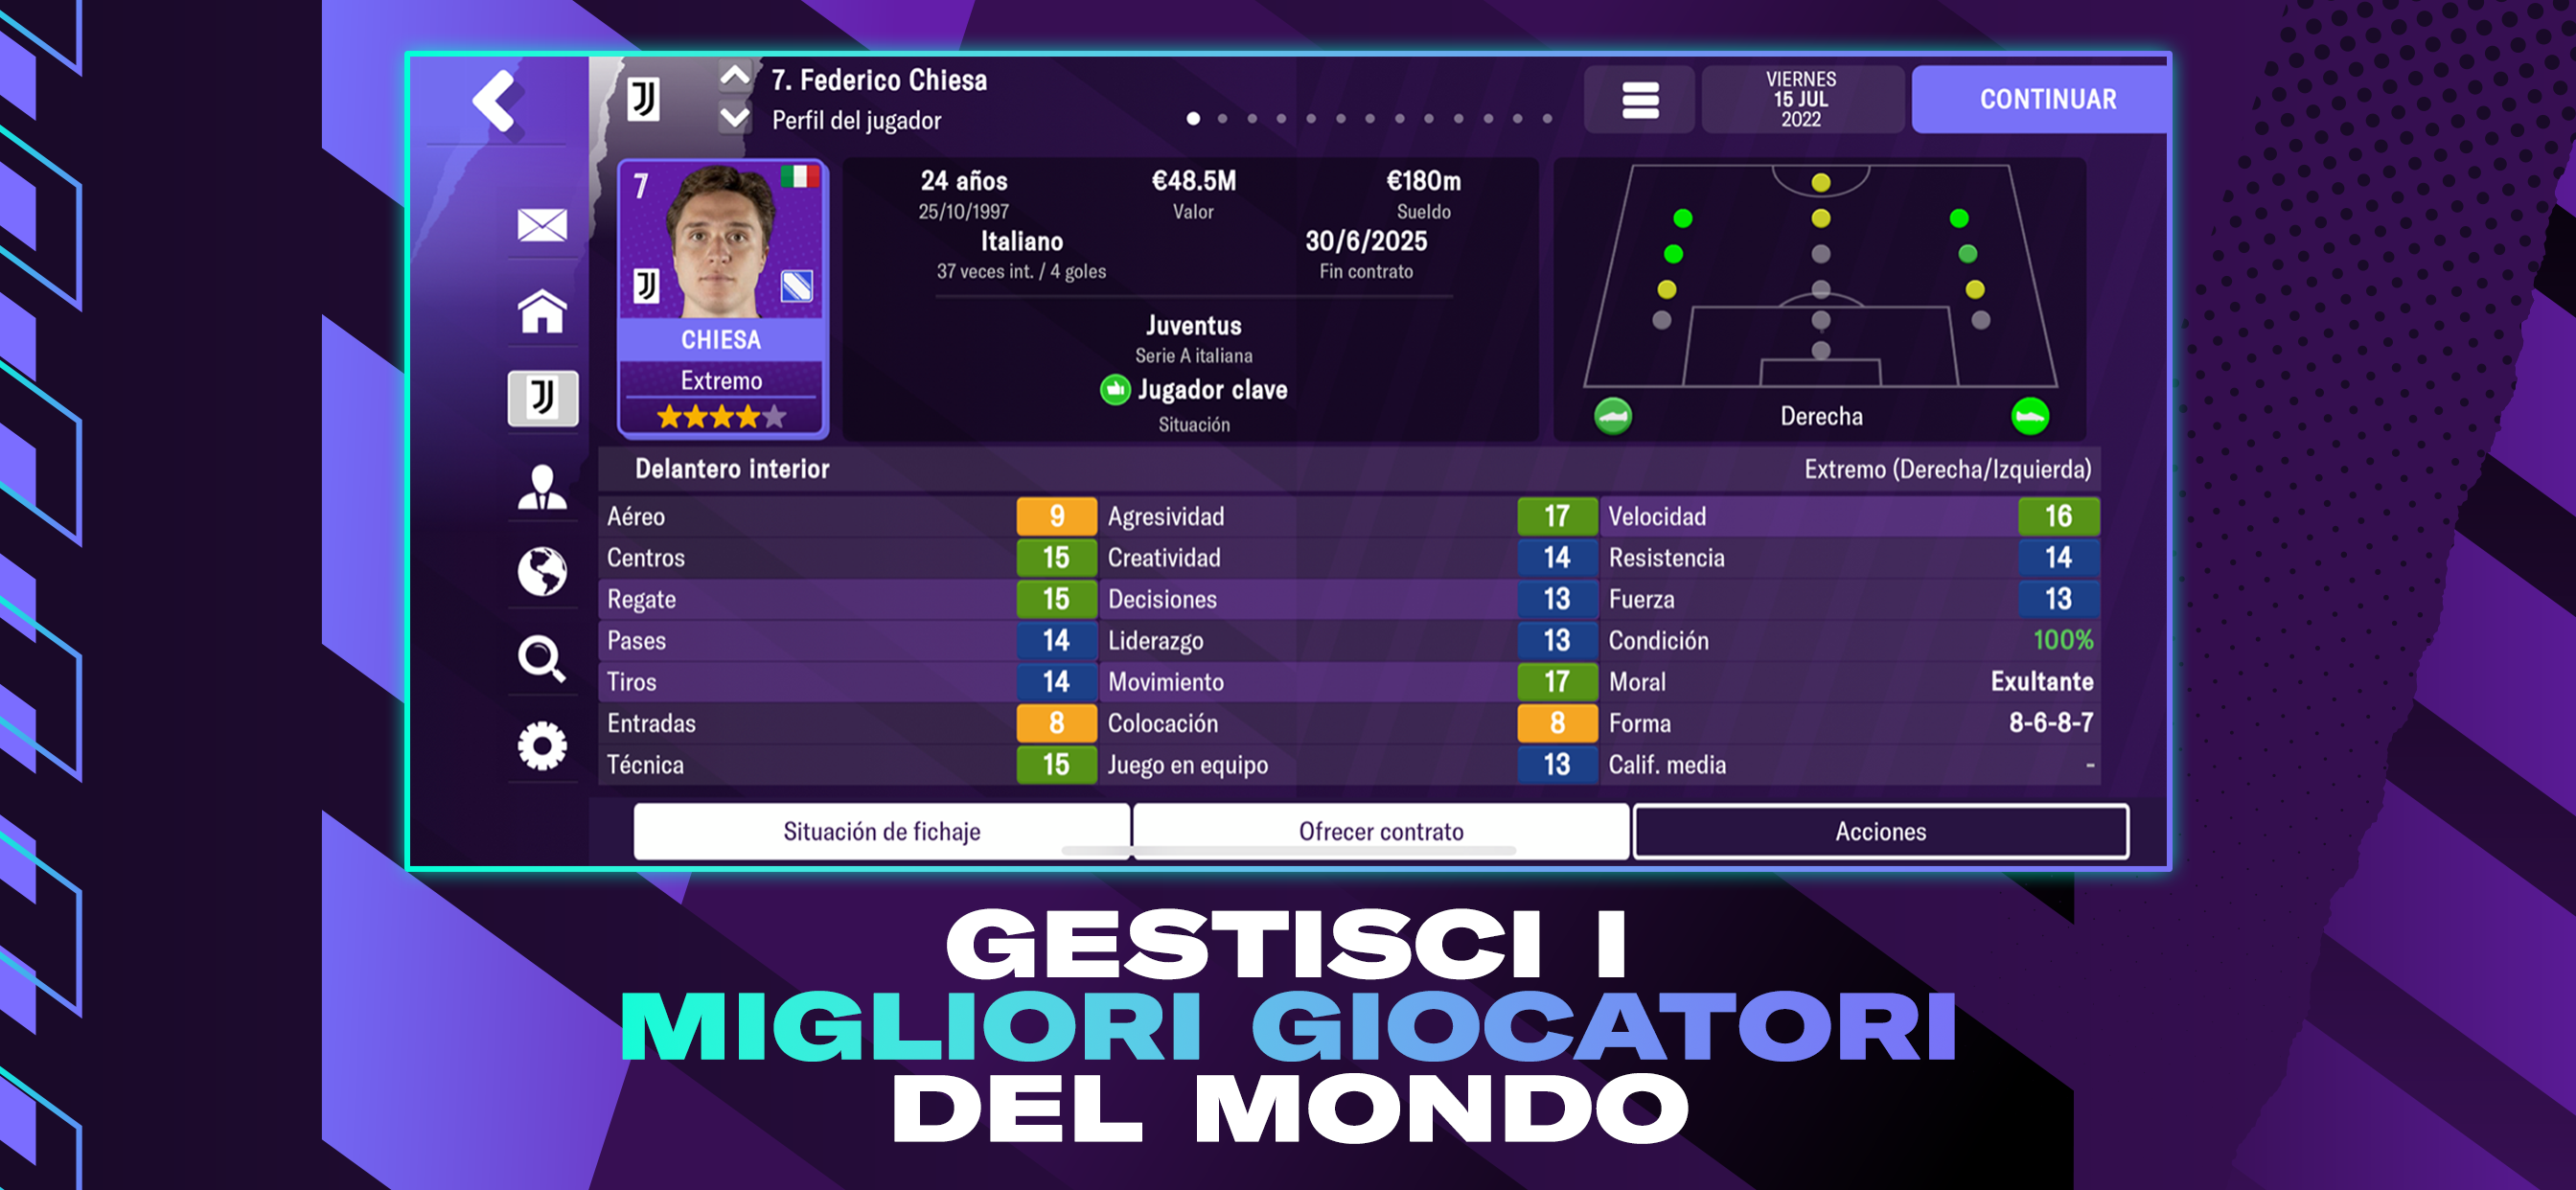 Football Manager 2023 Mobile Latest Version 14.4.0 (All) for Android